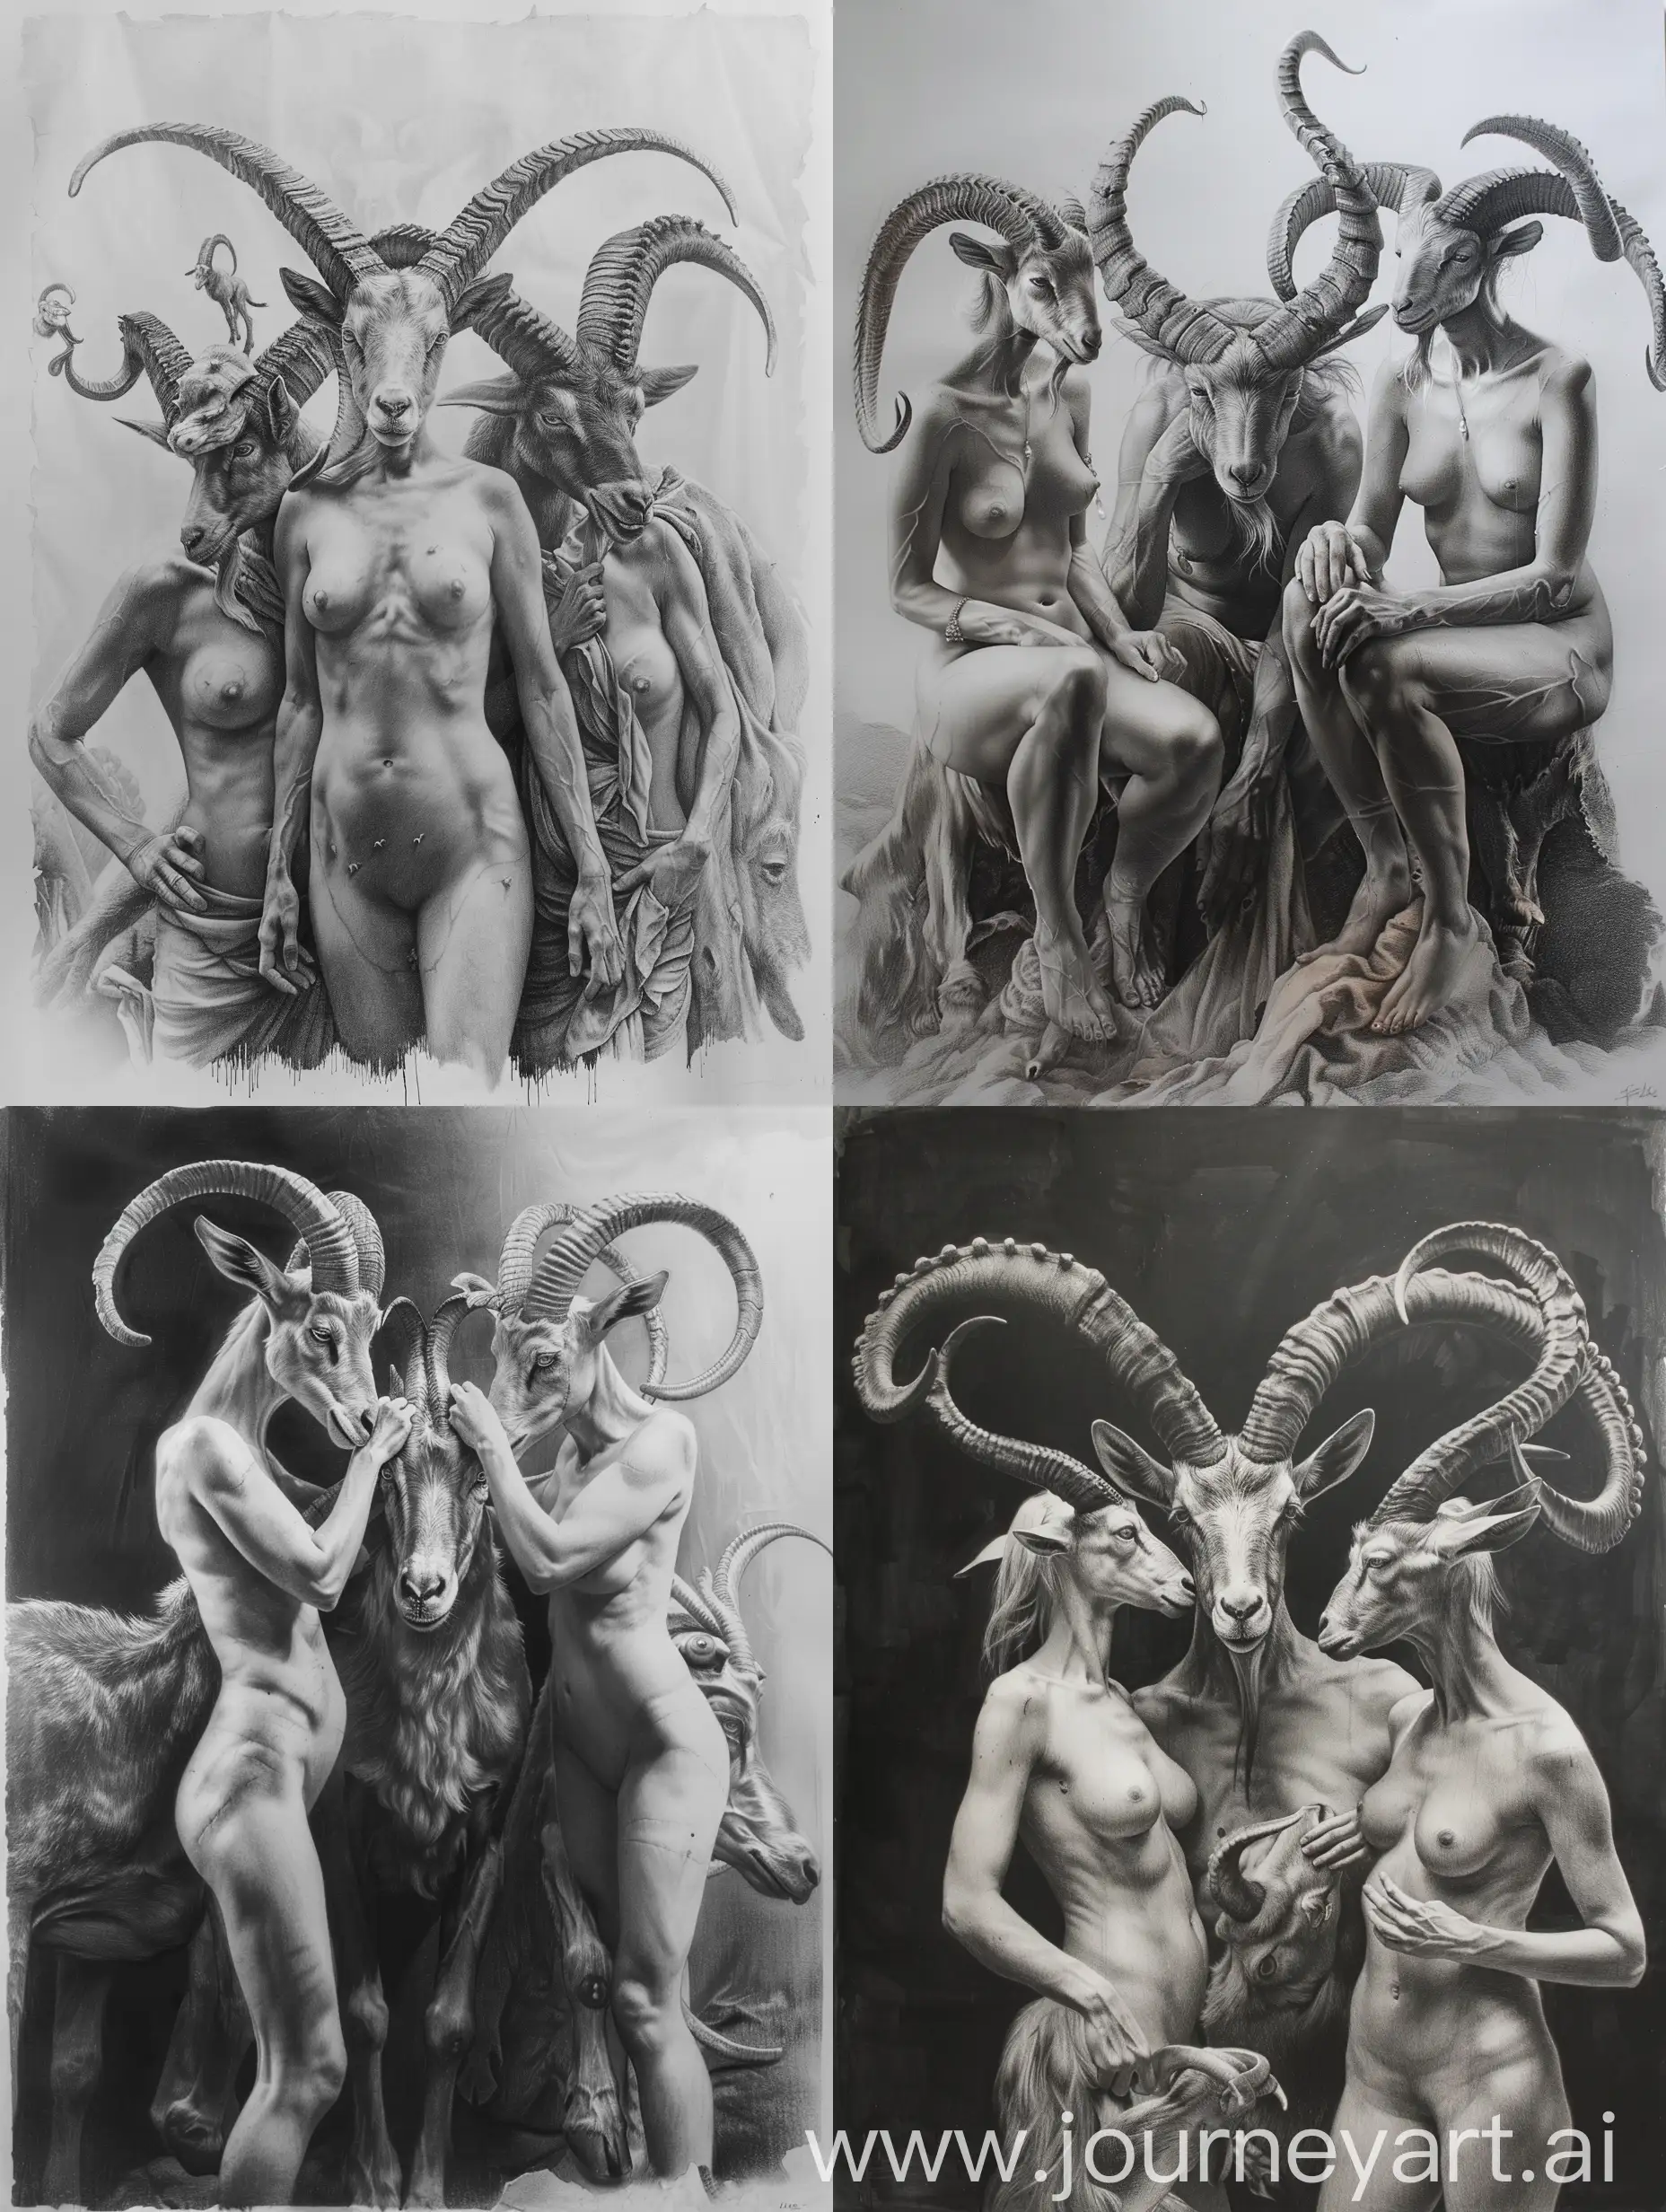 creative dark hyper realistic pencil sketch of three mythological figures with animal heads, each showing reverence towards the central goat-headed figure in a surreal setting on a large canvas in great details